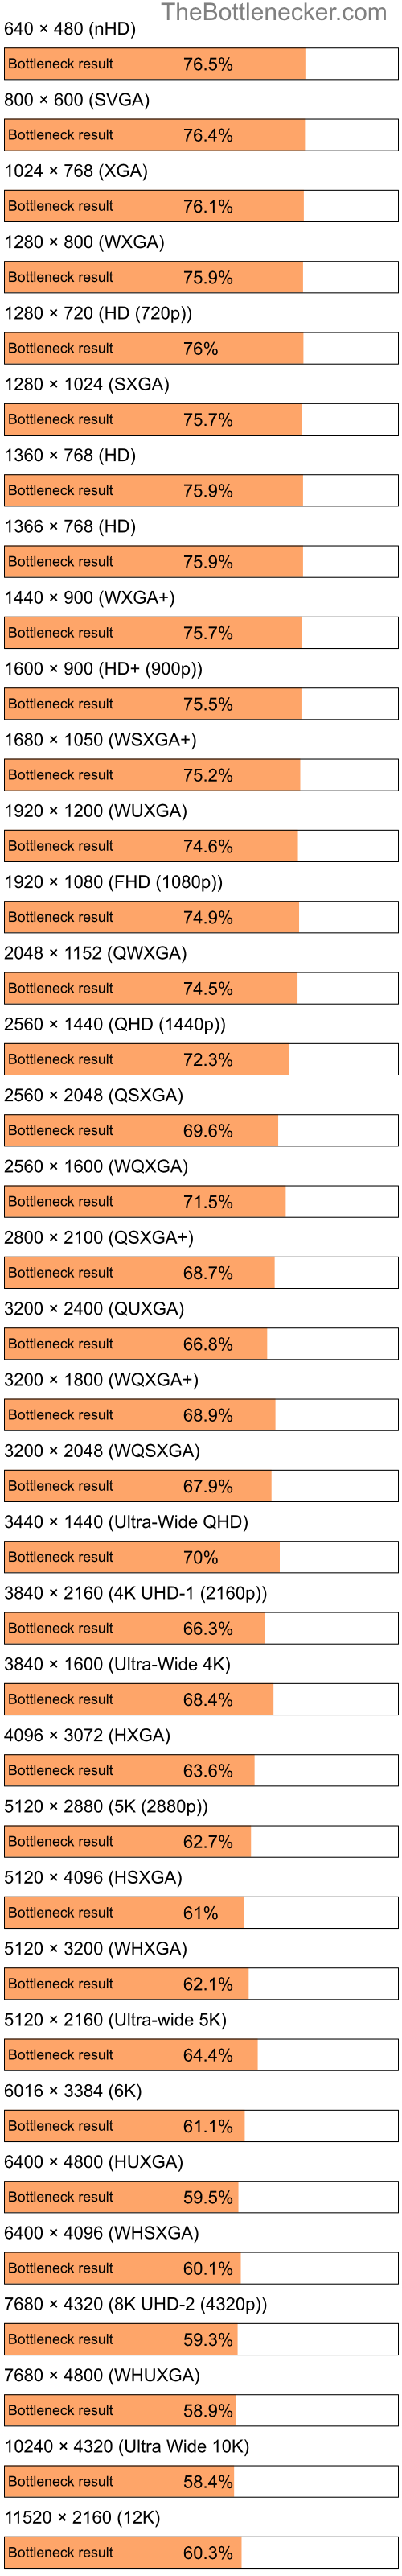 Bottleneck results by resolution for AMD Athlon XP 3000+ and NVIDIA GeForce GTX 1660 in Graphic Card Intense Tasks